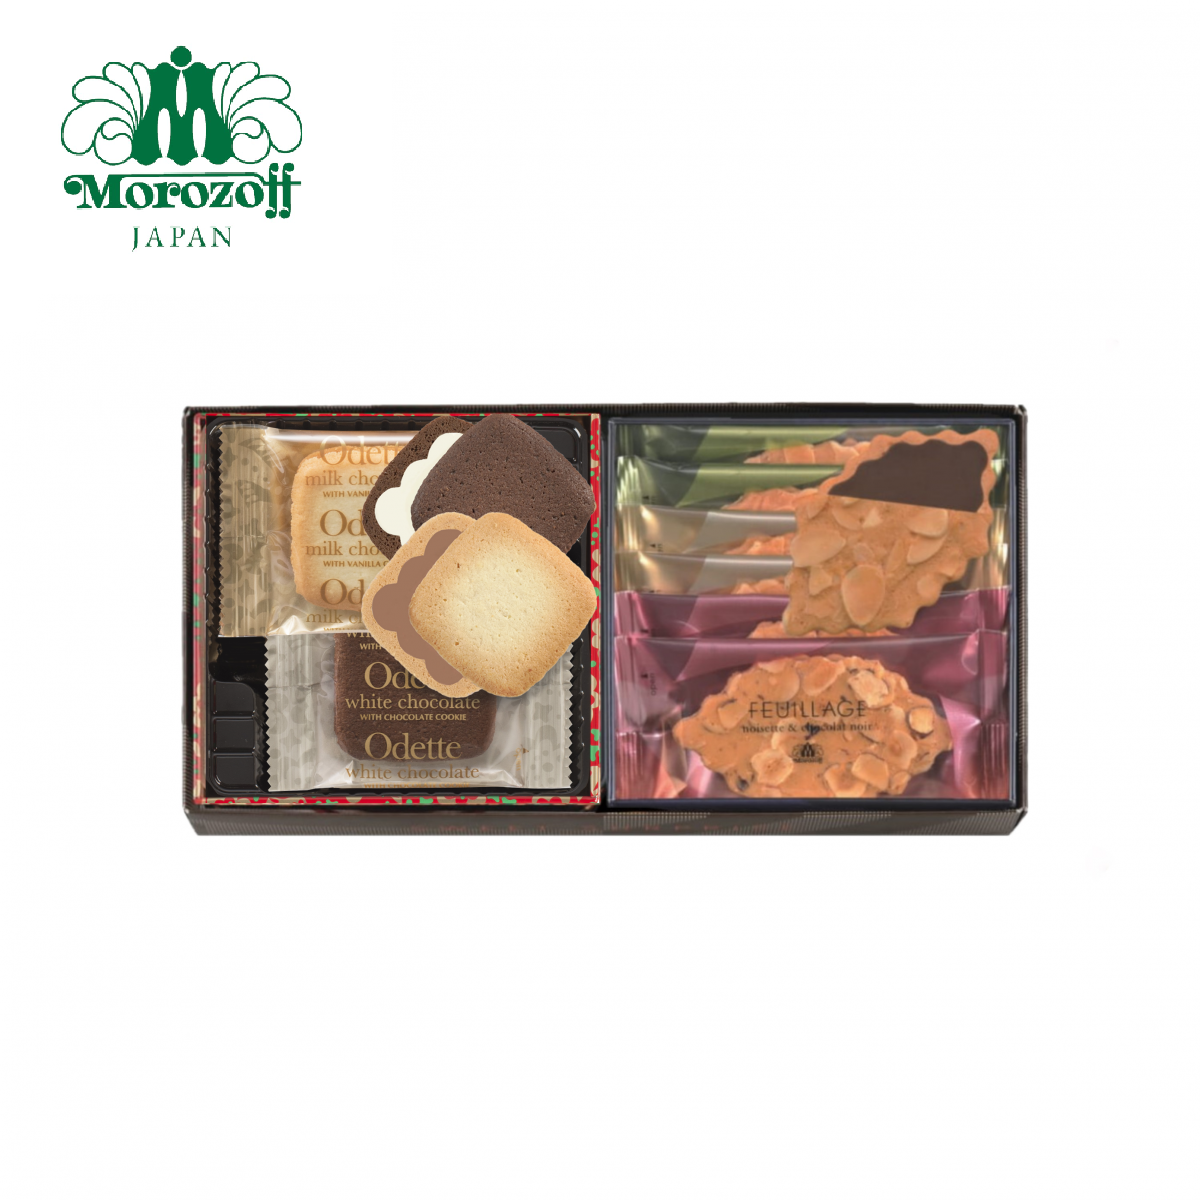 Japanese Assorted Cookies 2-can-set Mini Gift Box [ODETTE 5pcs + FEUILLAGE 6pcs]